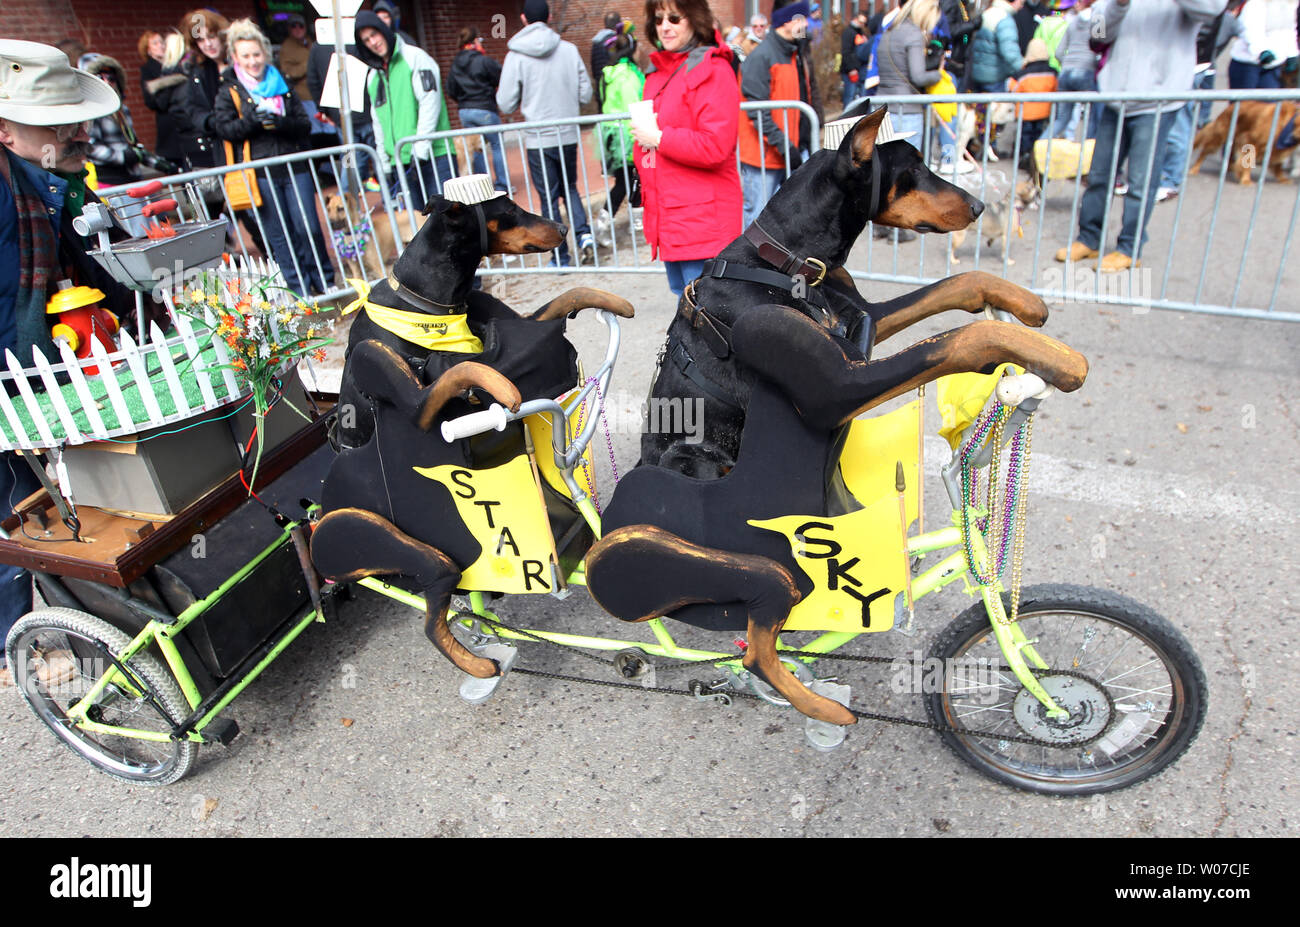 Doberman Pinschers Sky and Star appear to be pedaling a bicycle during the Pet Parade in St. Louis on February 23, 2014.  UPI/Bill Greenblatt Stock Photo